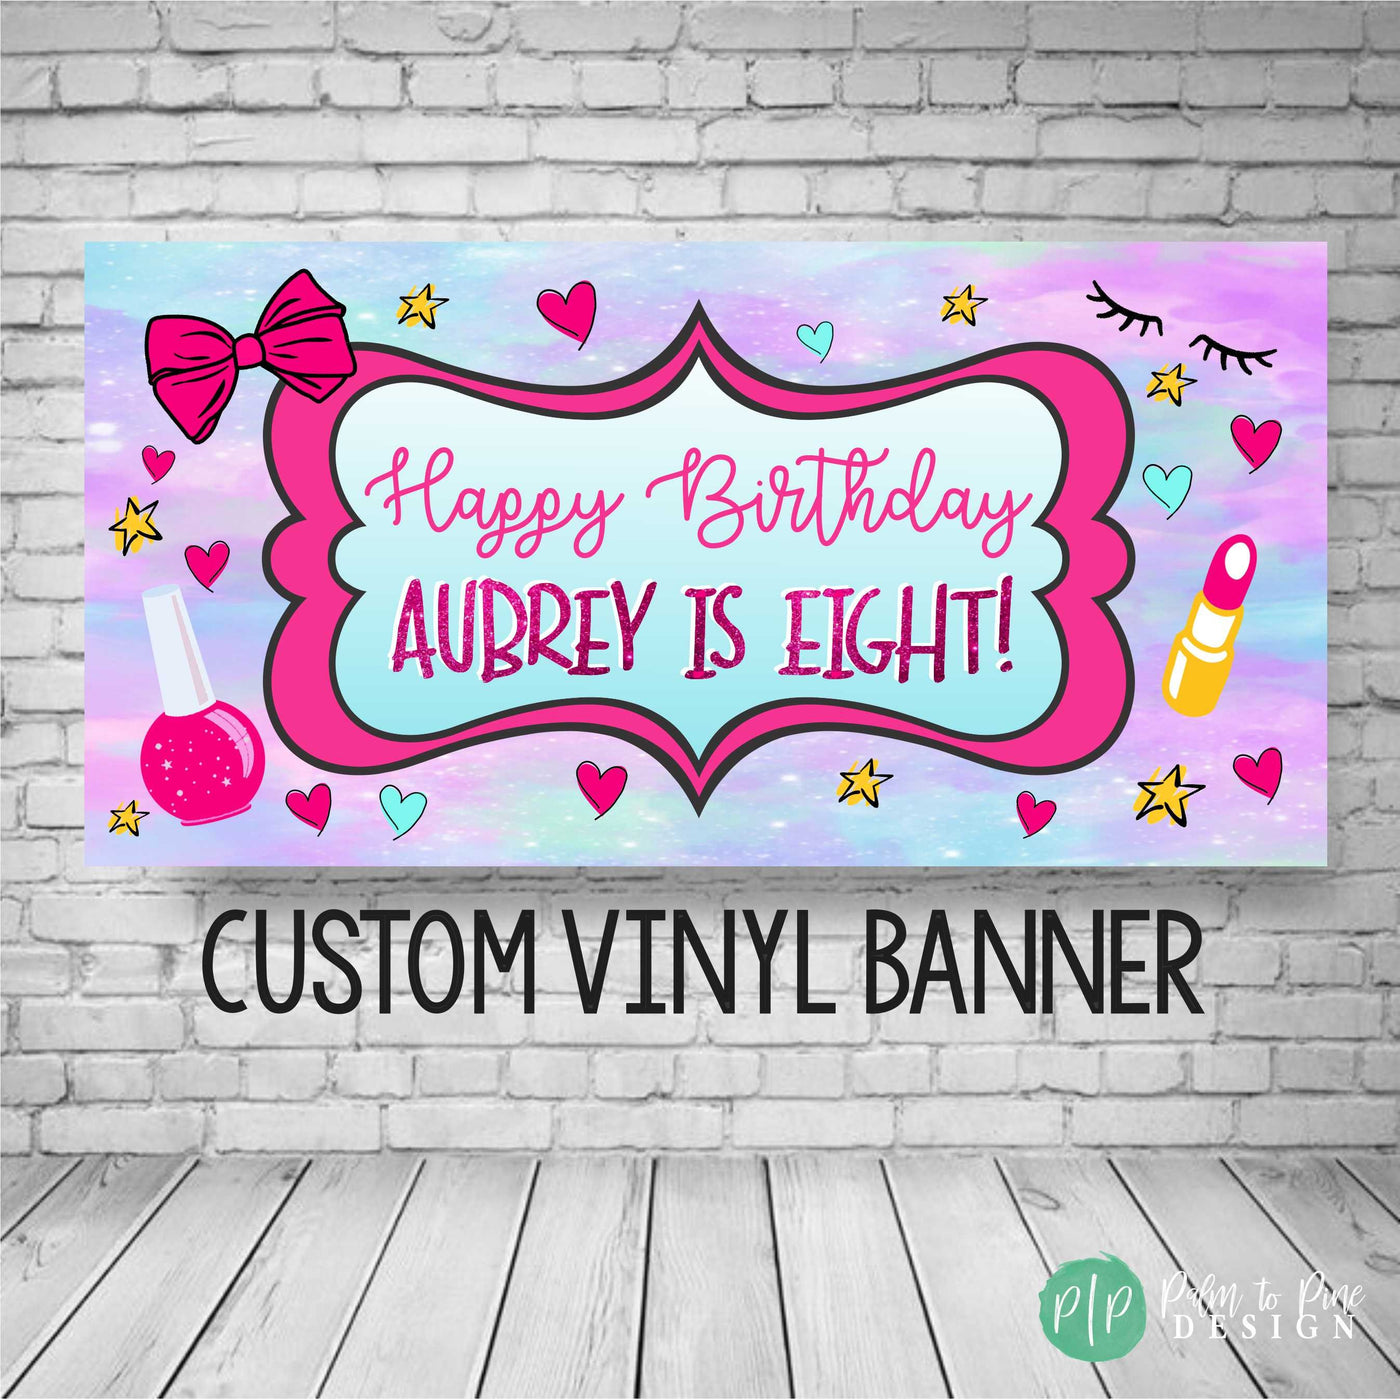 Spa birthday party, Spa Party for Girls, Pamper Party decor, Sleepover birthday banner, Girls Birthday Party, Personalized Vinyl Banner, Spa